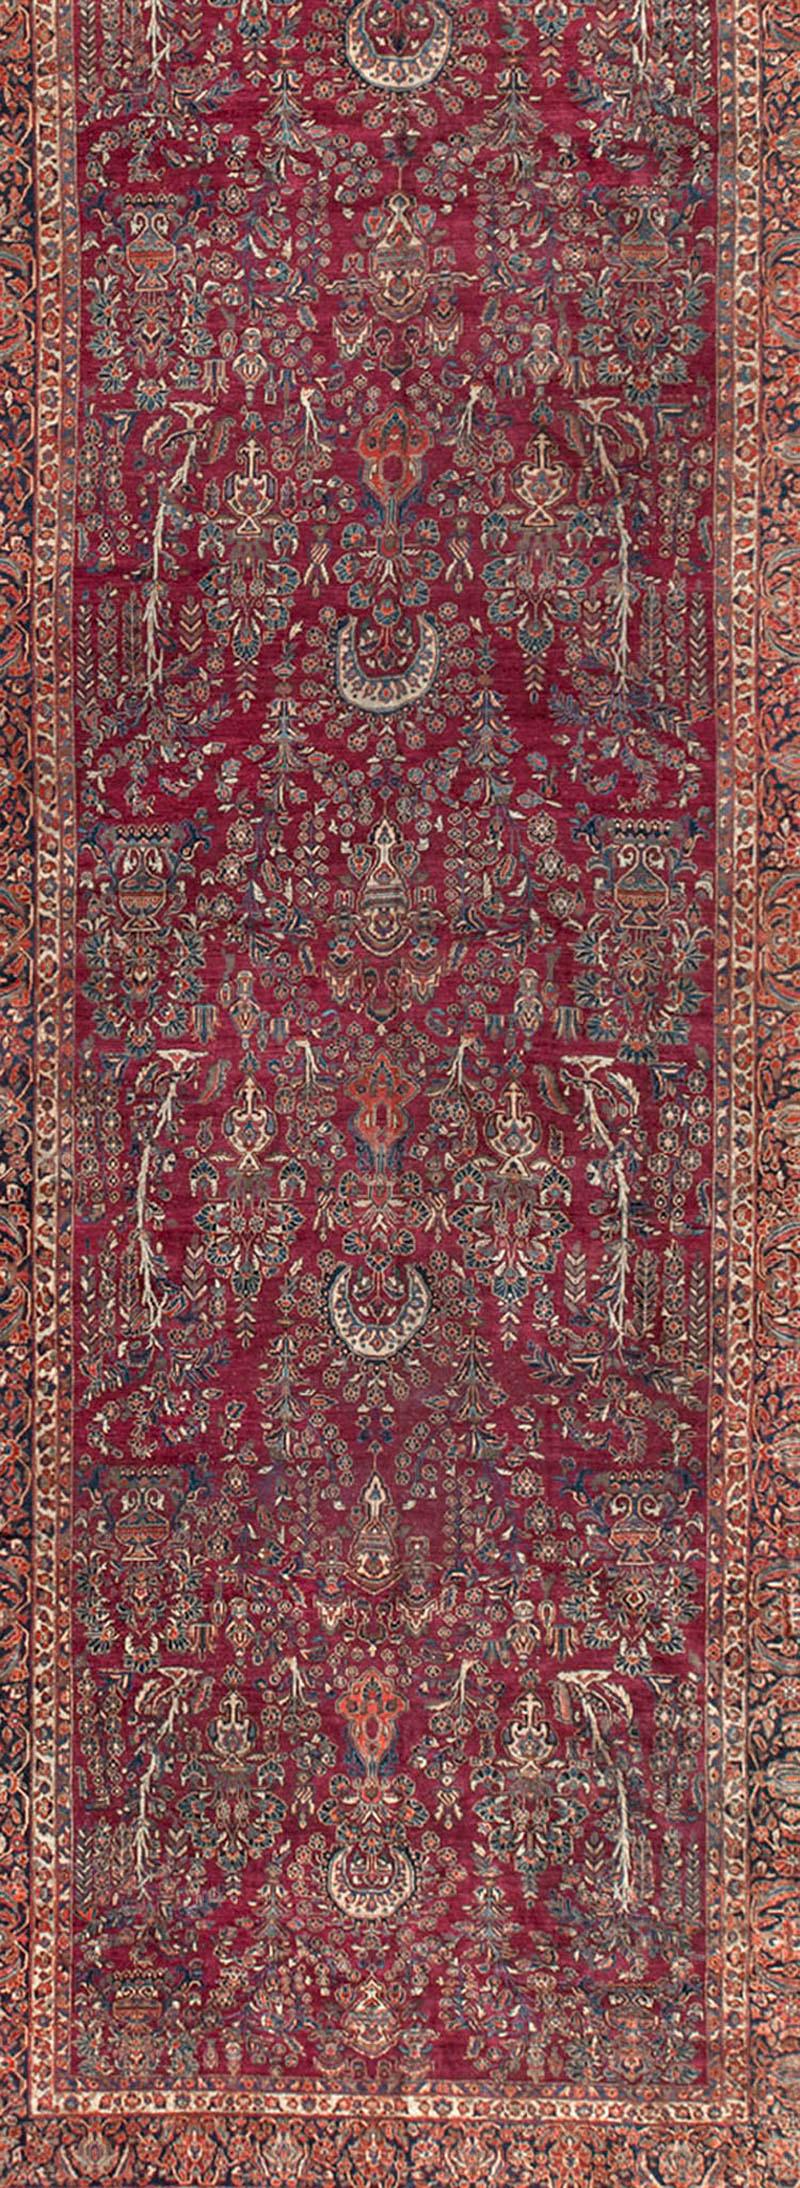 Vintage Fine Persian Sarouk circa 1920 Gallery Rug 9' x 23'5 In Good Condition For Sale In Secaucus, NJ